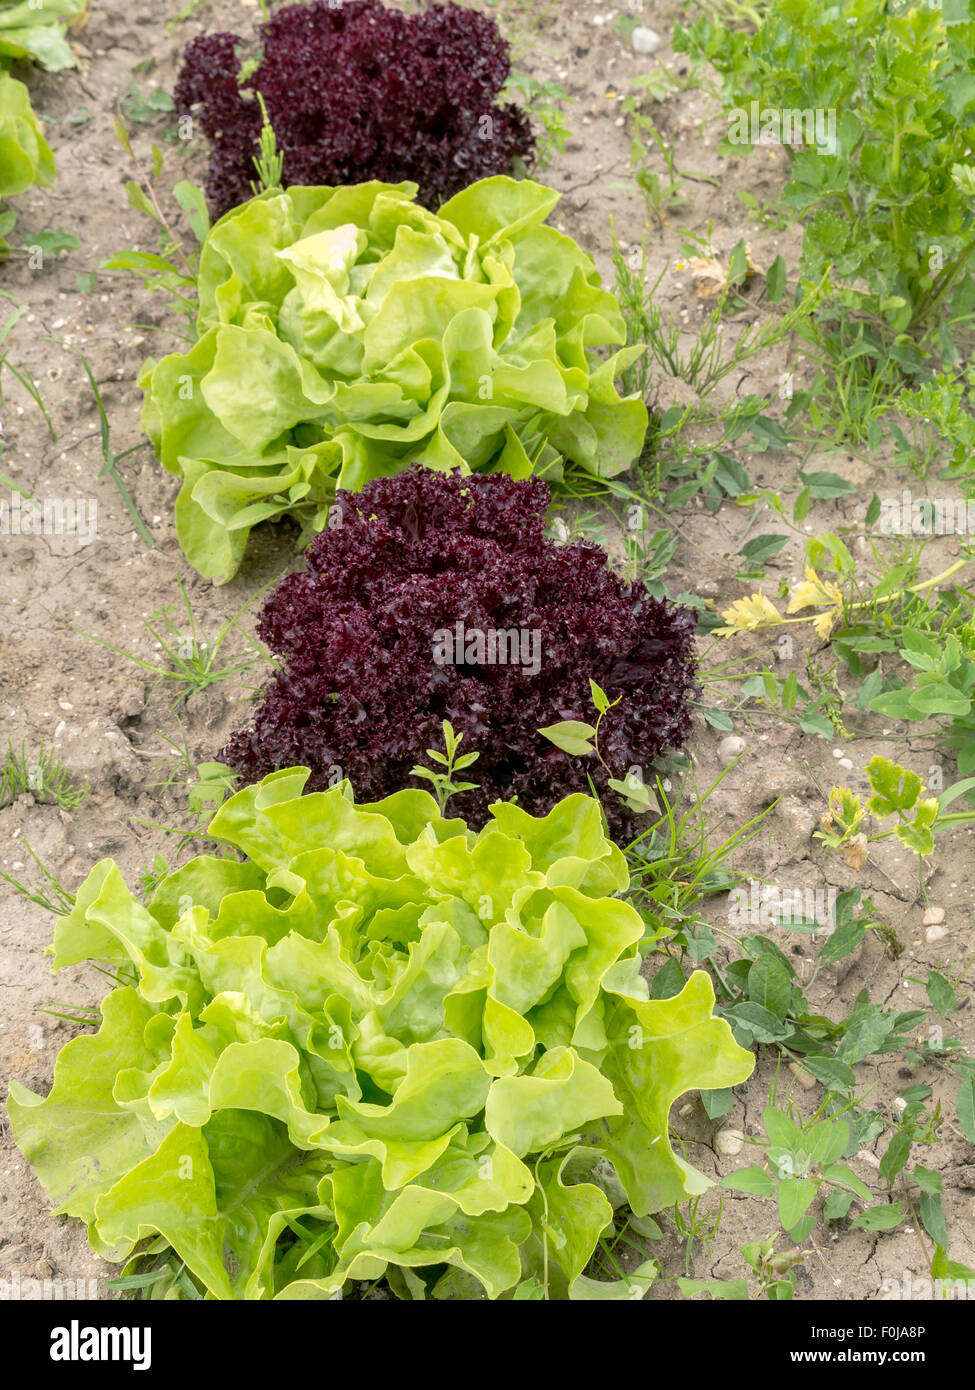 Row of green and red lettuce growing on garden patch Stock Photo